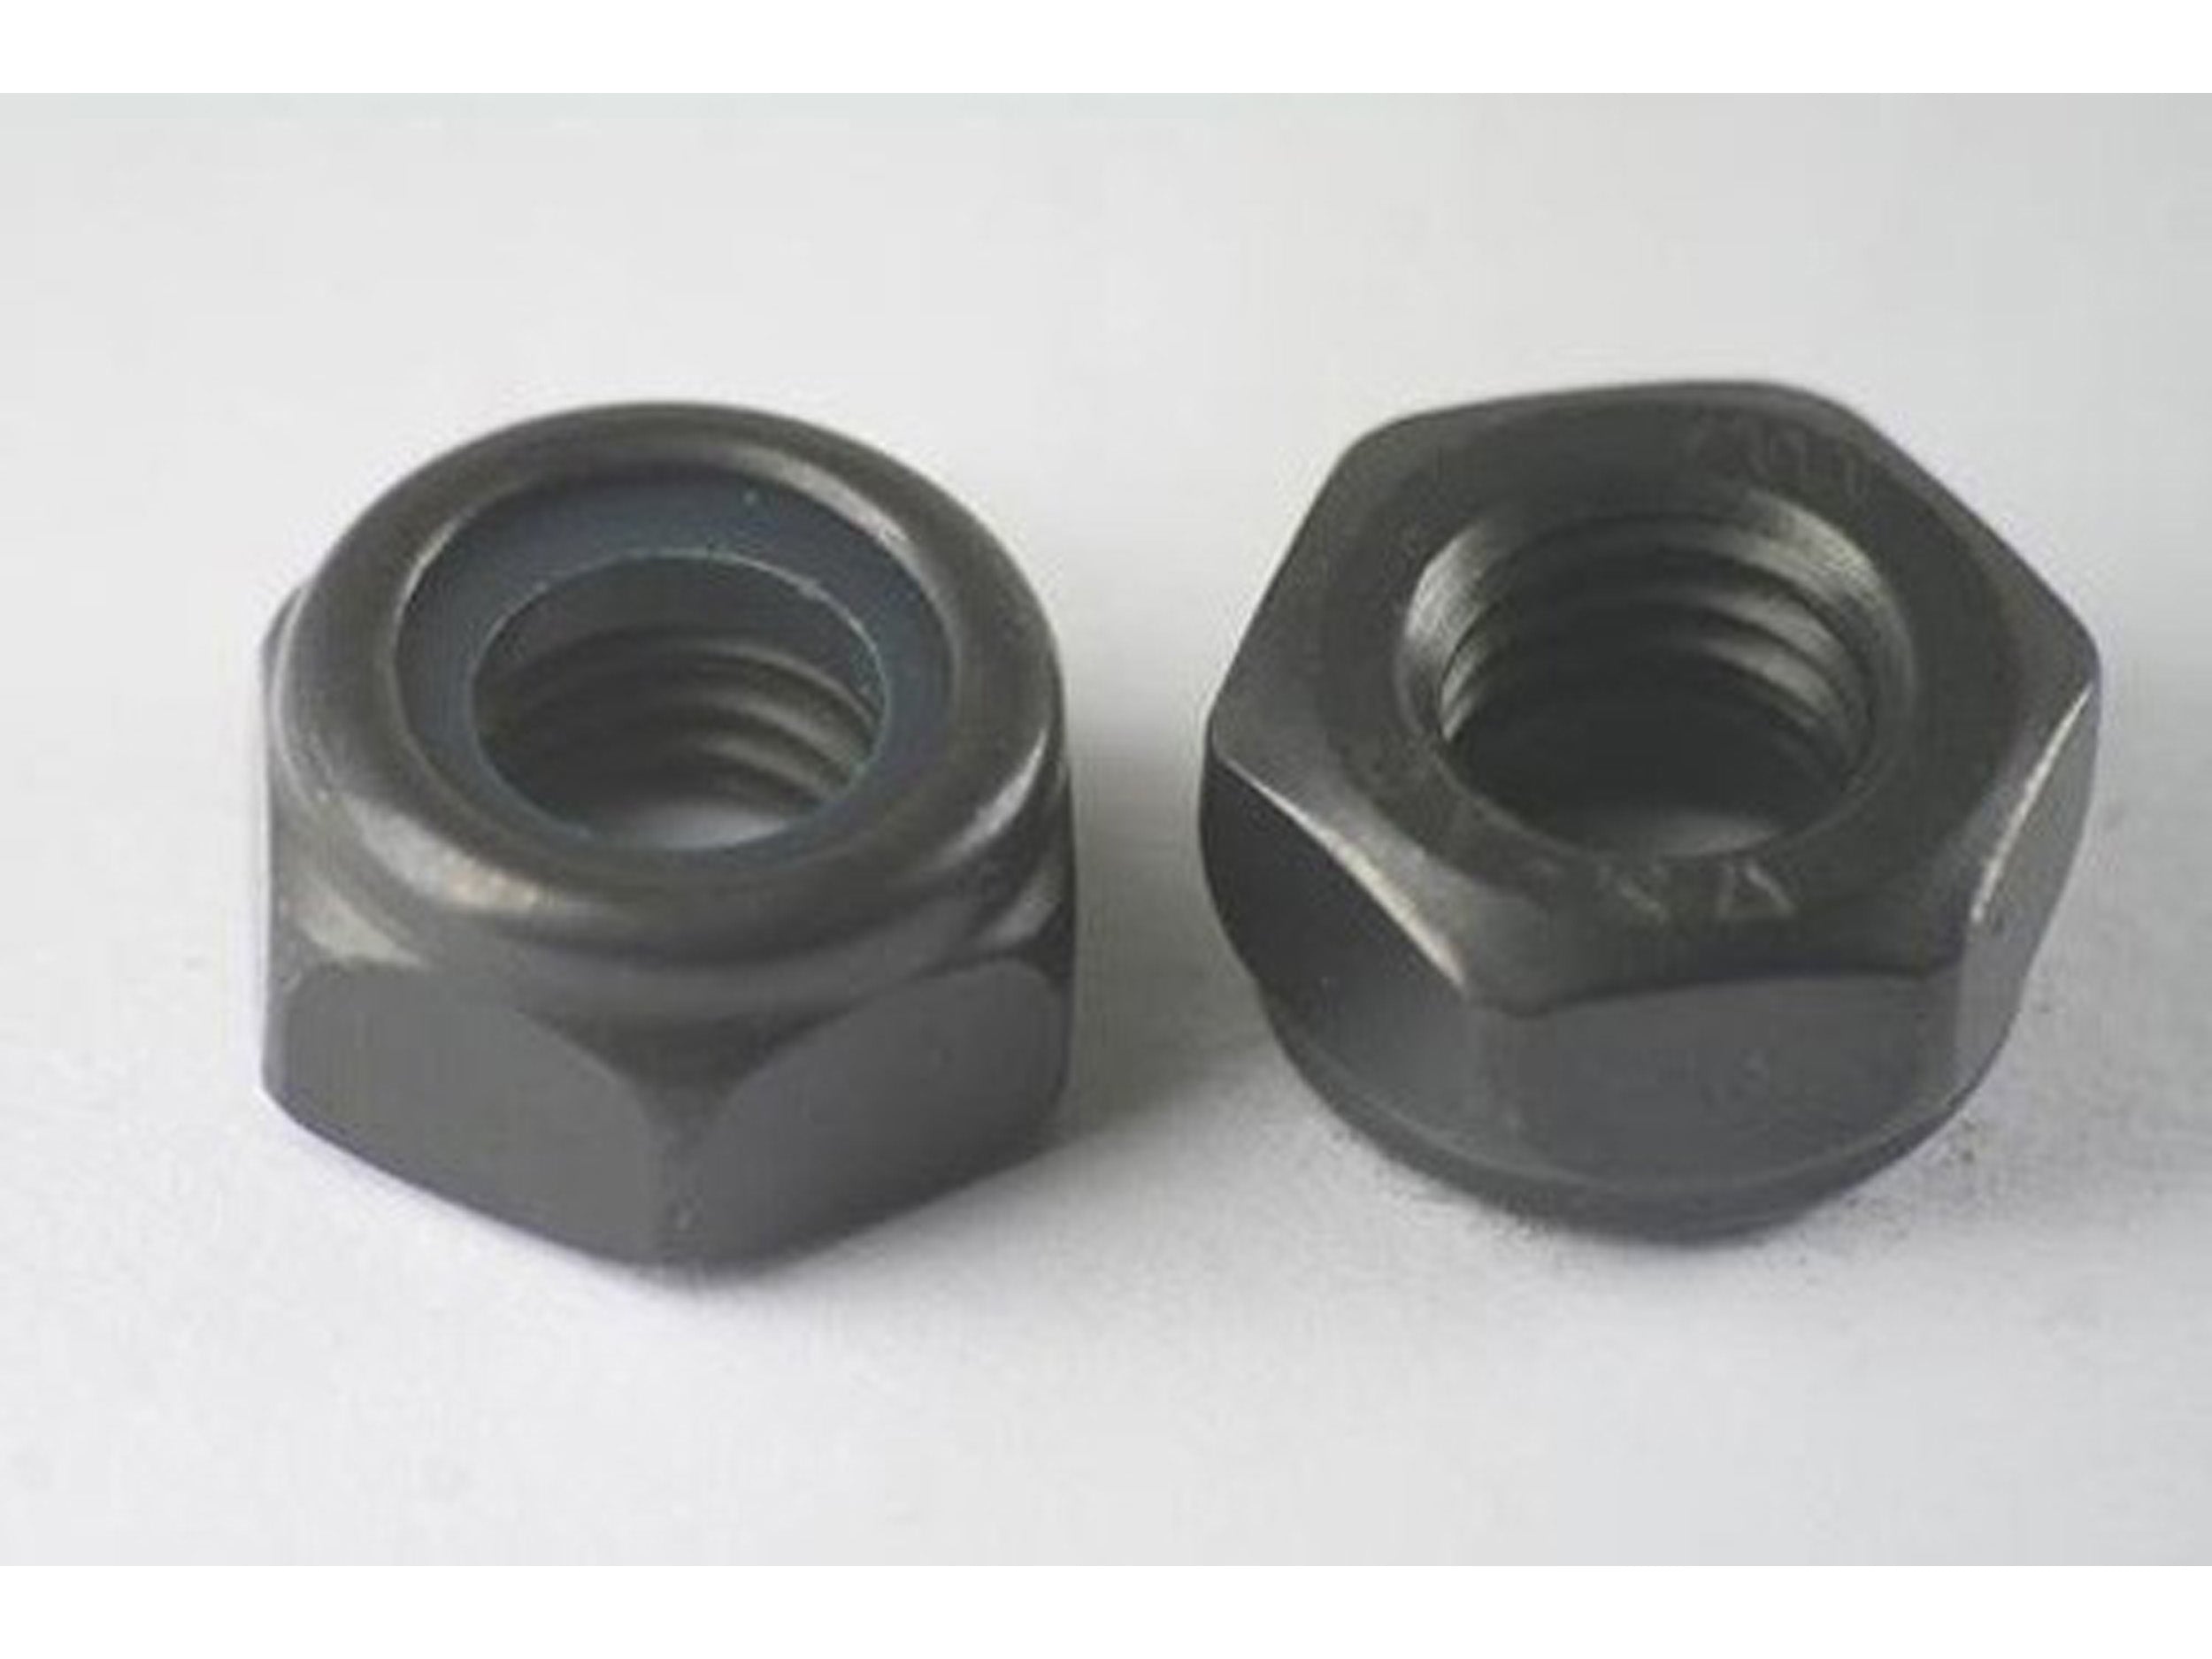 Stainless Steel Nyloc Nut (black-oxide coated or bare) - for NAS Defender Roll Cage Bolts (*sold individually*)